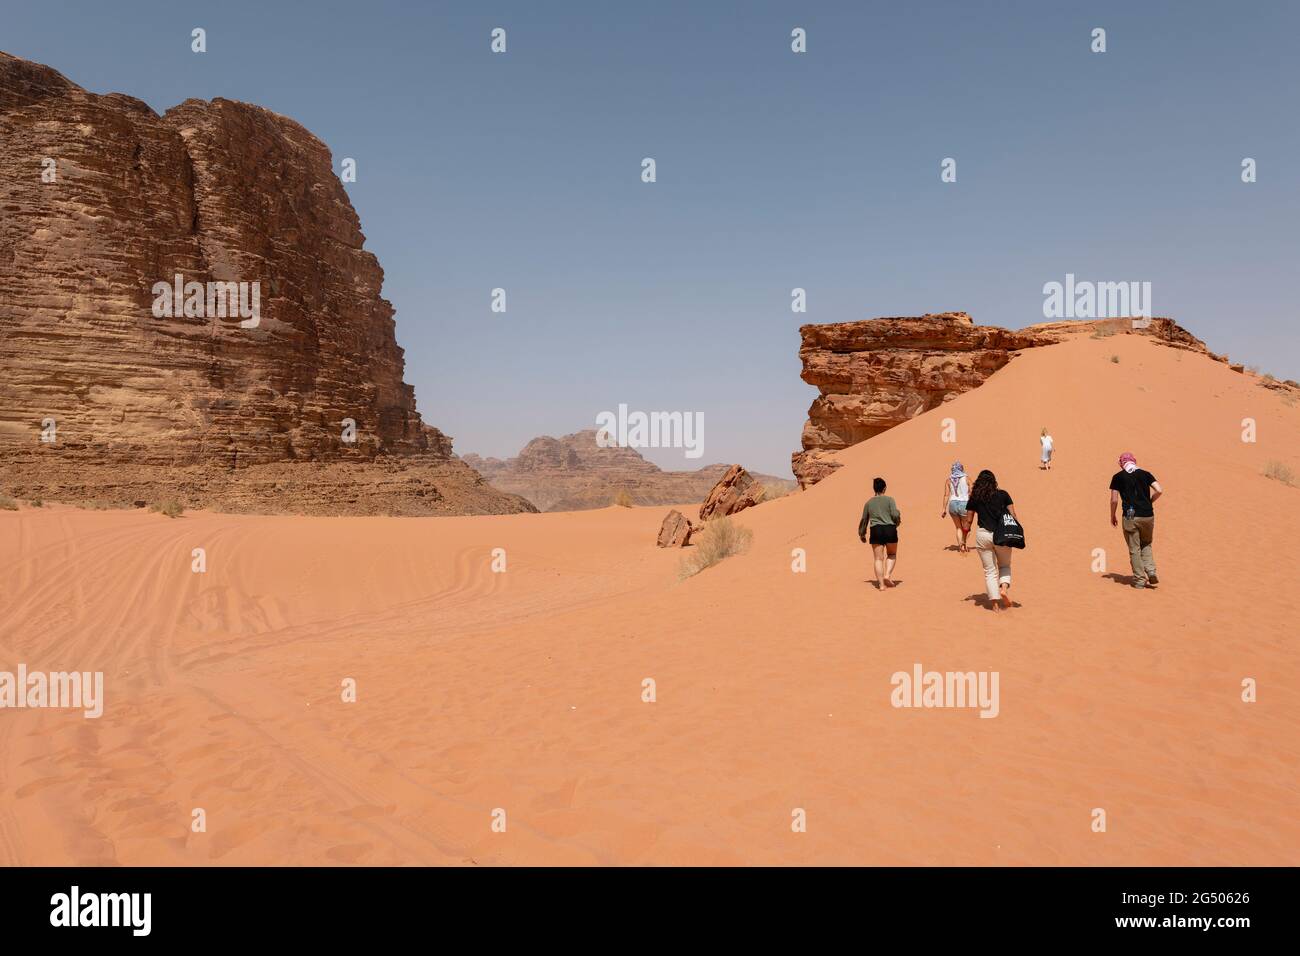 Tourists exploring the Wadi Rum Protected Area. Wadi Rum or Valley of the Moon is famous for its stunning desert landscape, desert valleys and dunes. Stock Photo